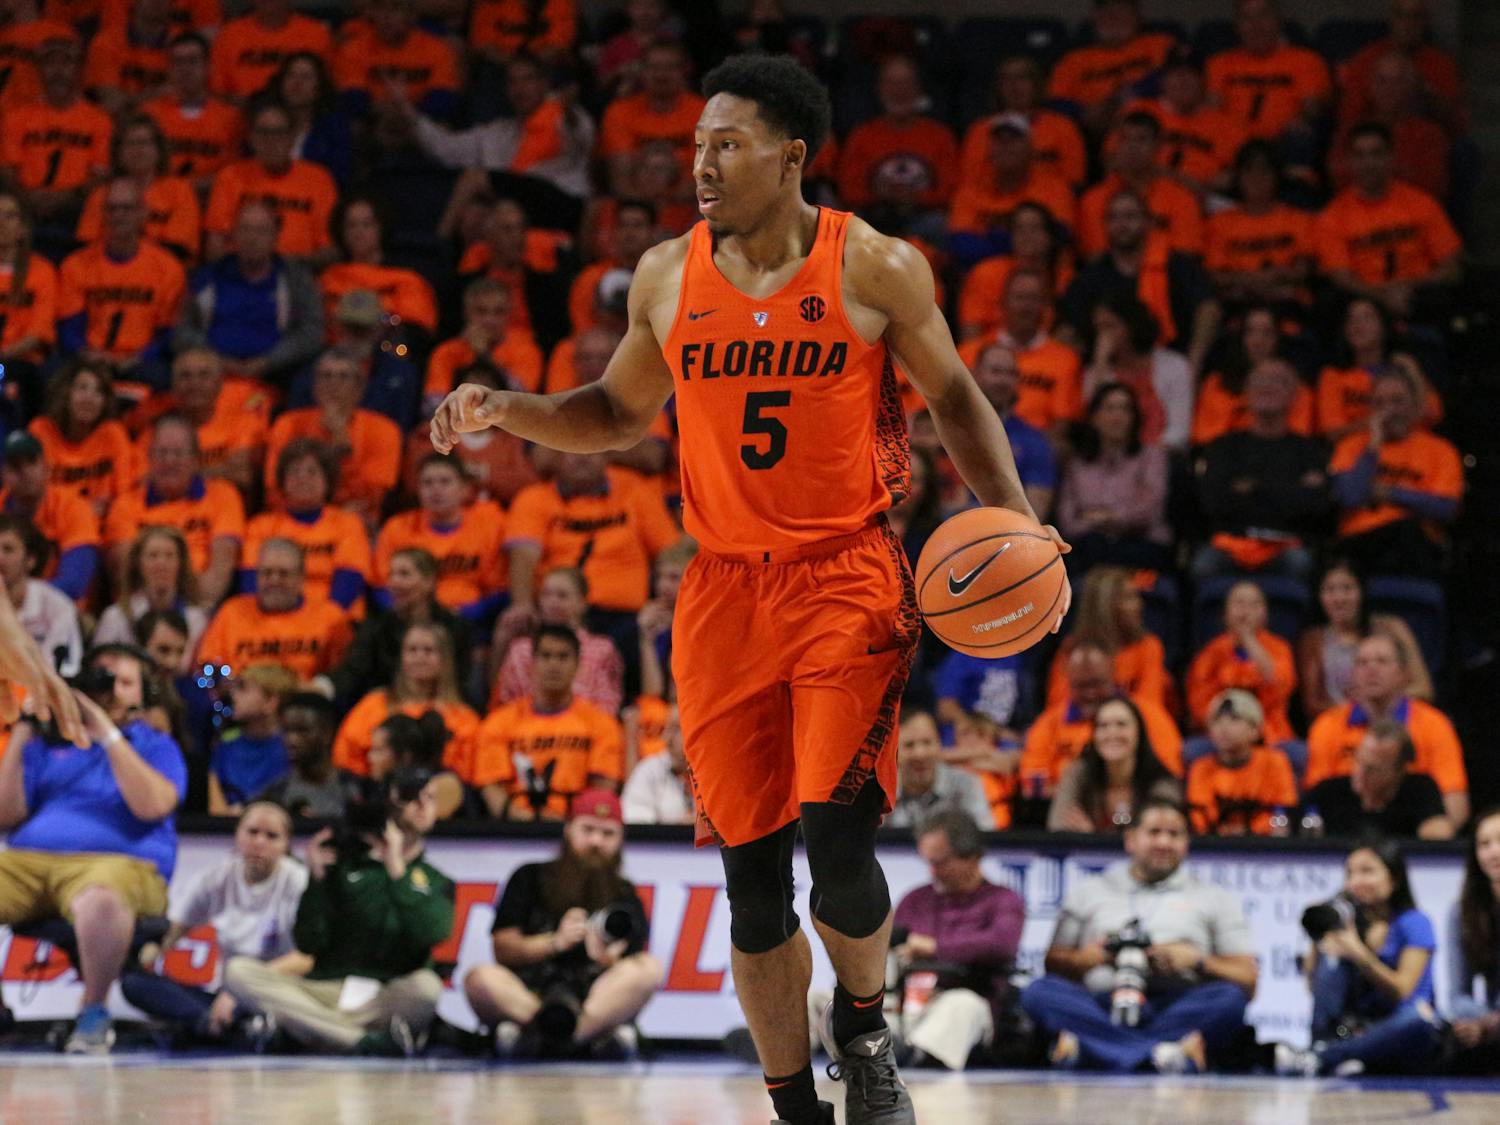 Senior guard KeVaughn Allen was held to zero points in Florida's 81-60 loss to Florida State. 